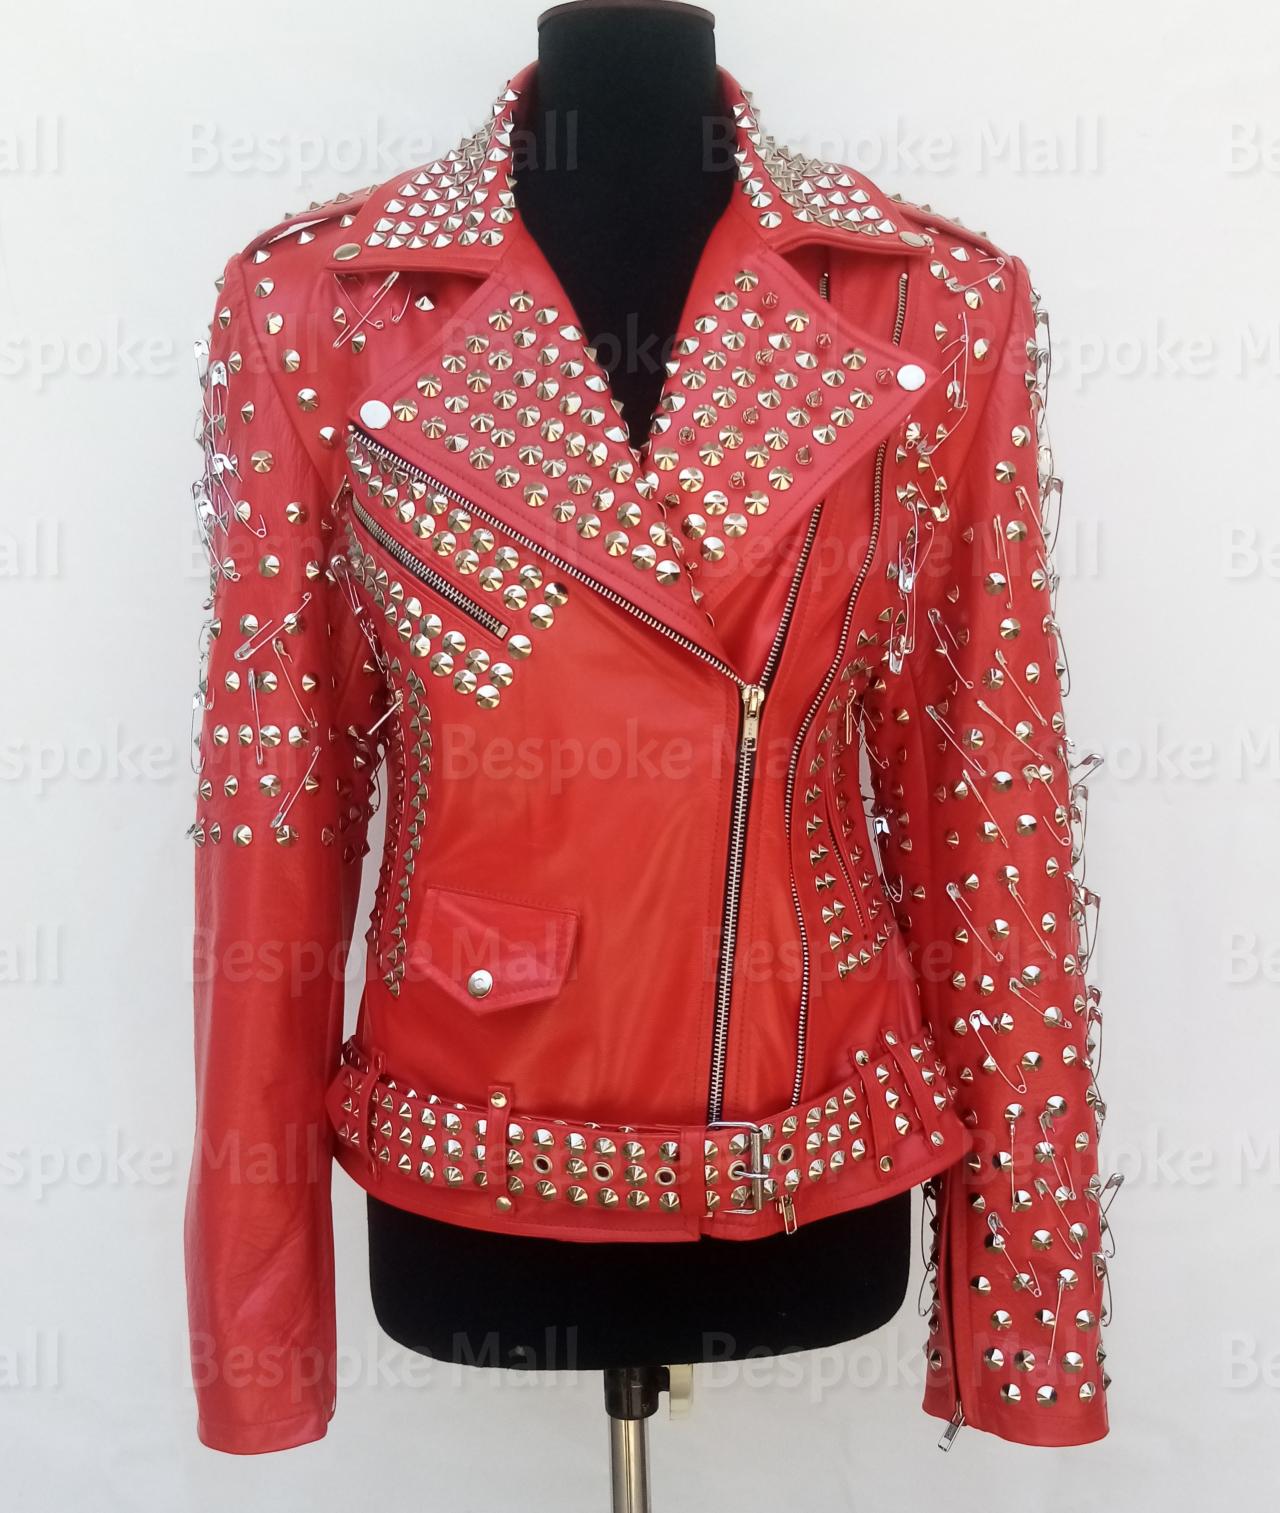 New Handmade Women Red Full Silver studded Unique Style Brando Belted Cowhide Leather Jacket-73